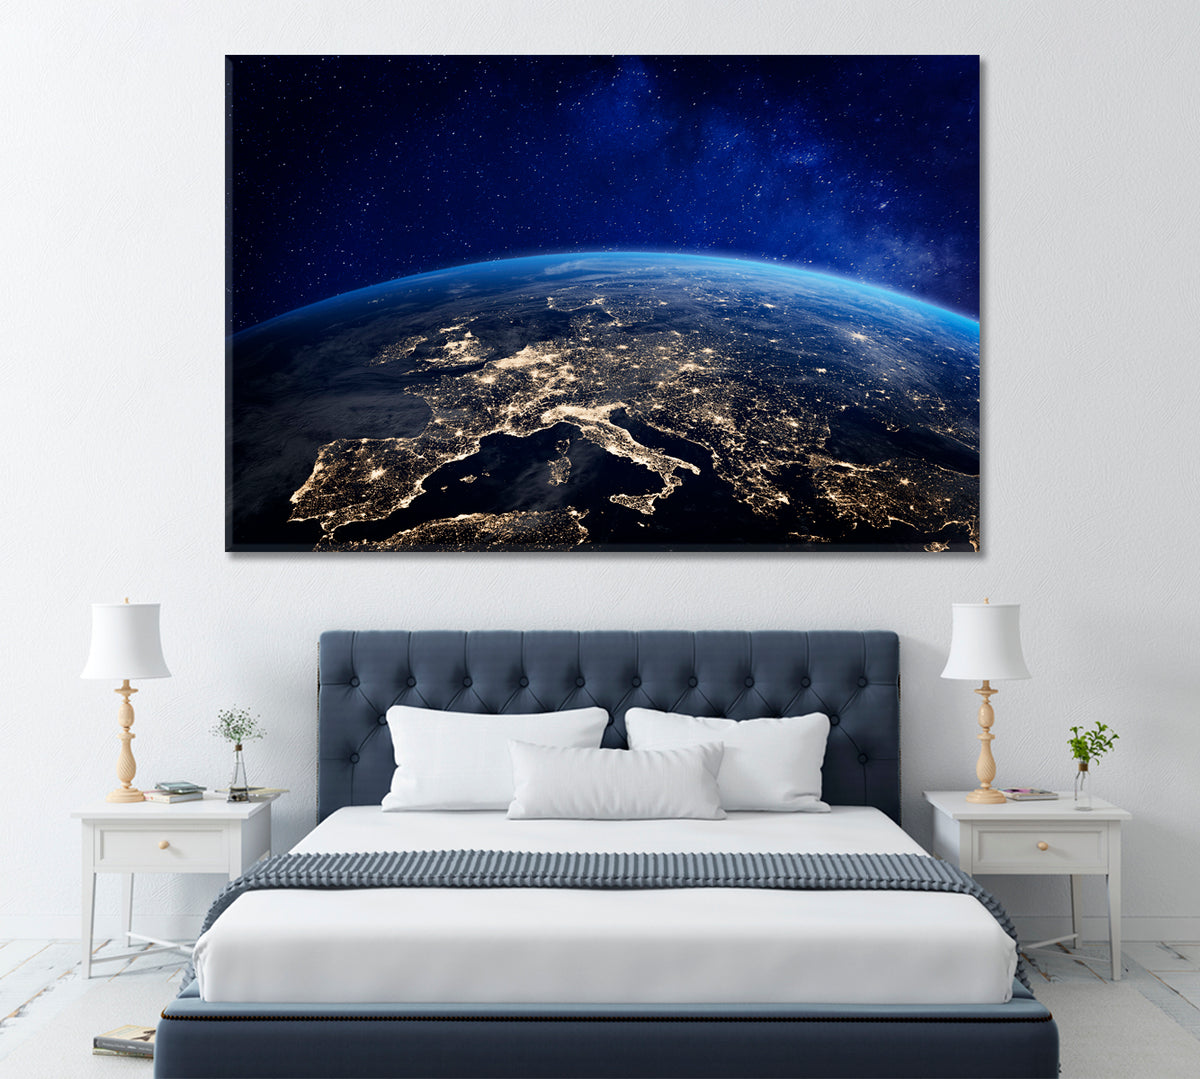 Planet Earth City Lights Canvas Print ArtLexy 1 Panel 24"x16" inches 